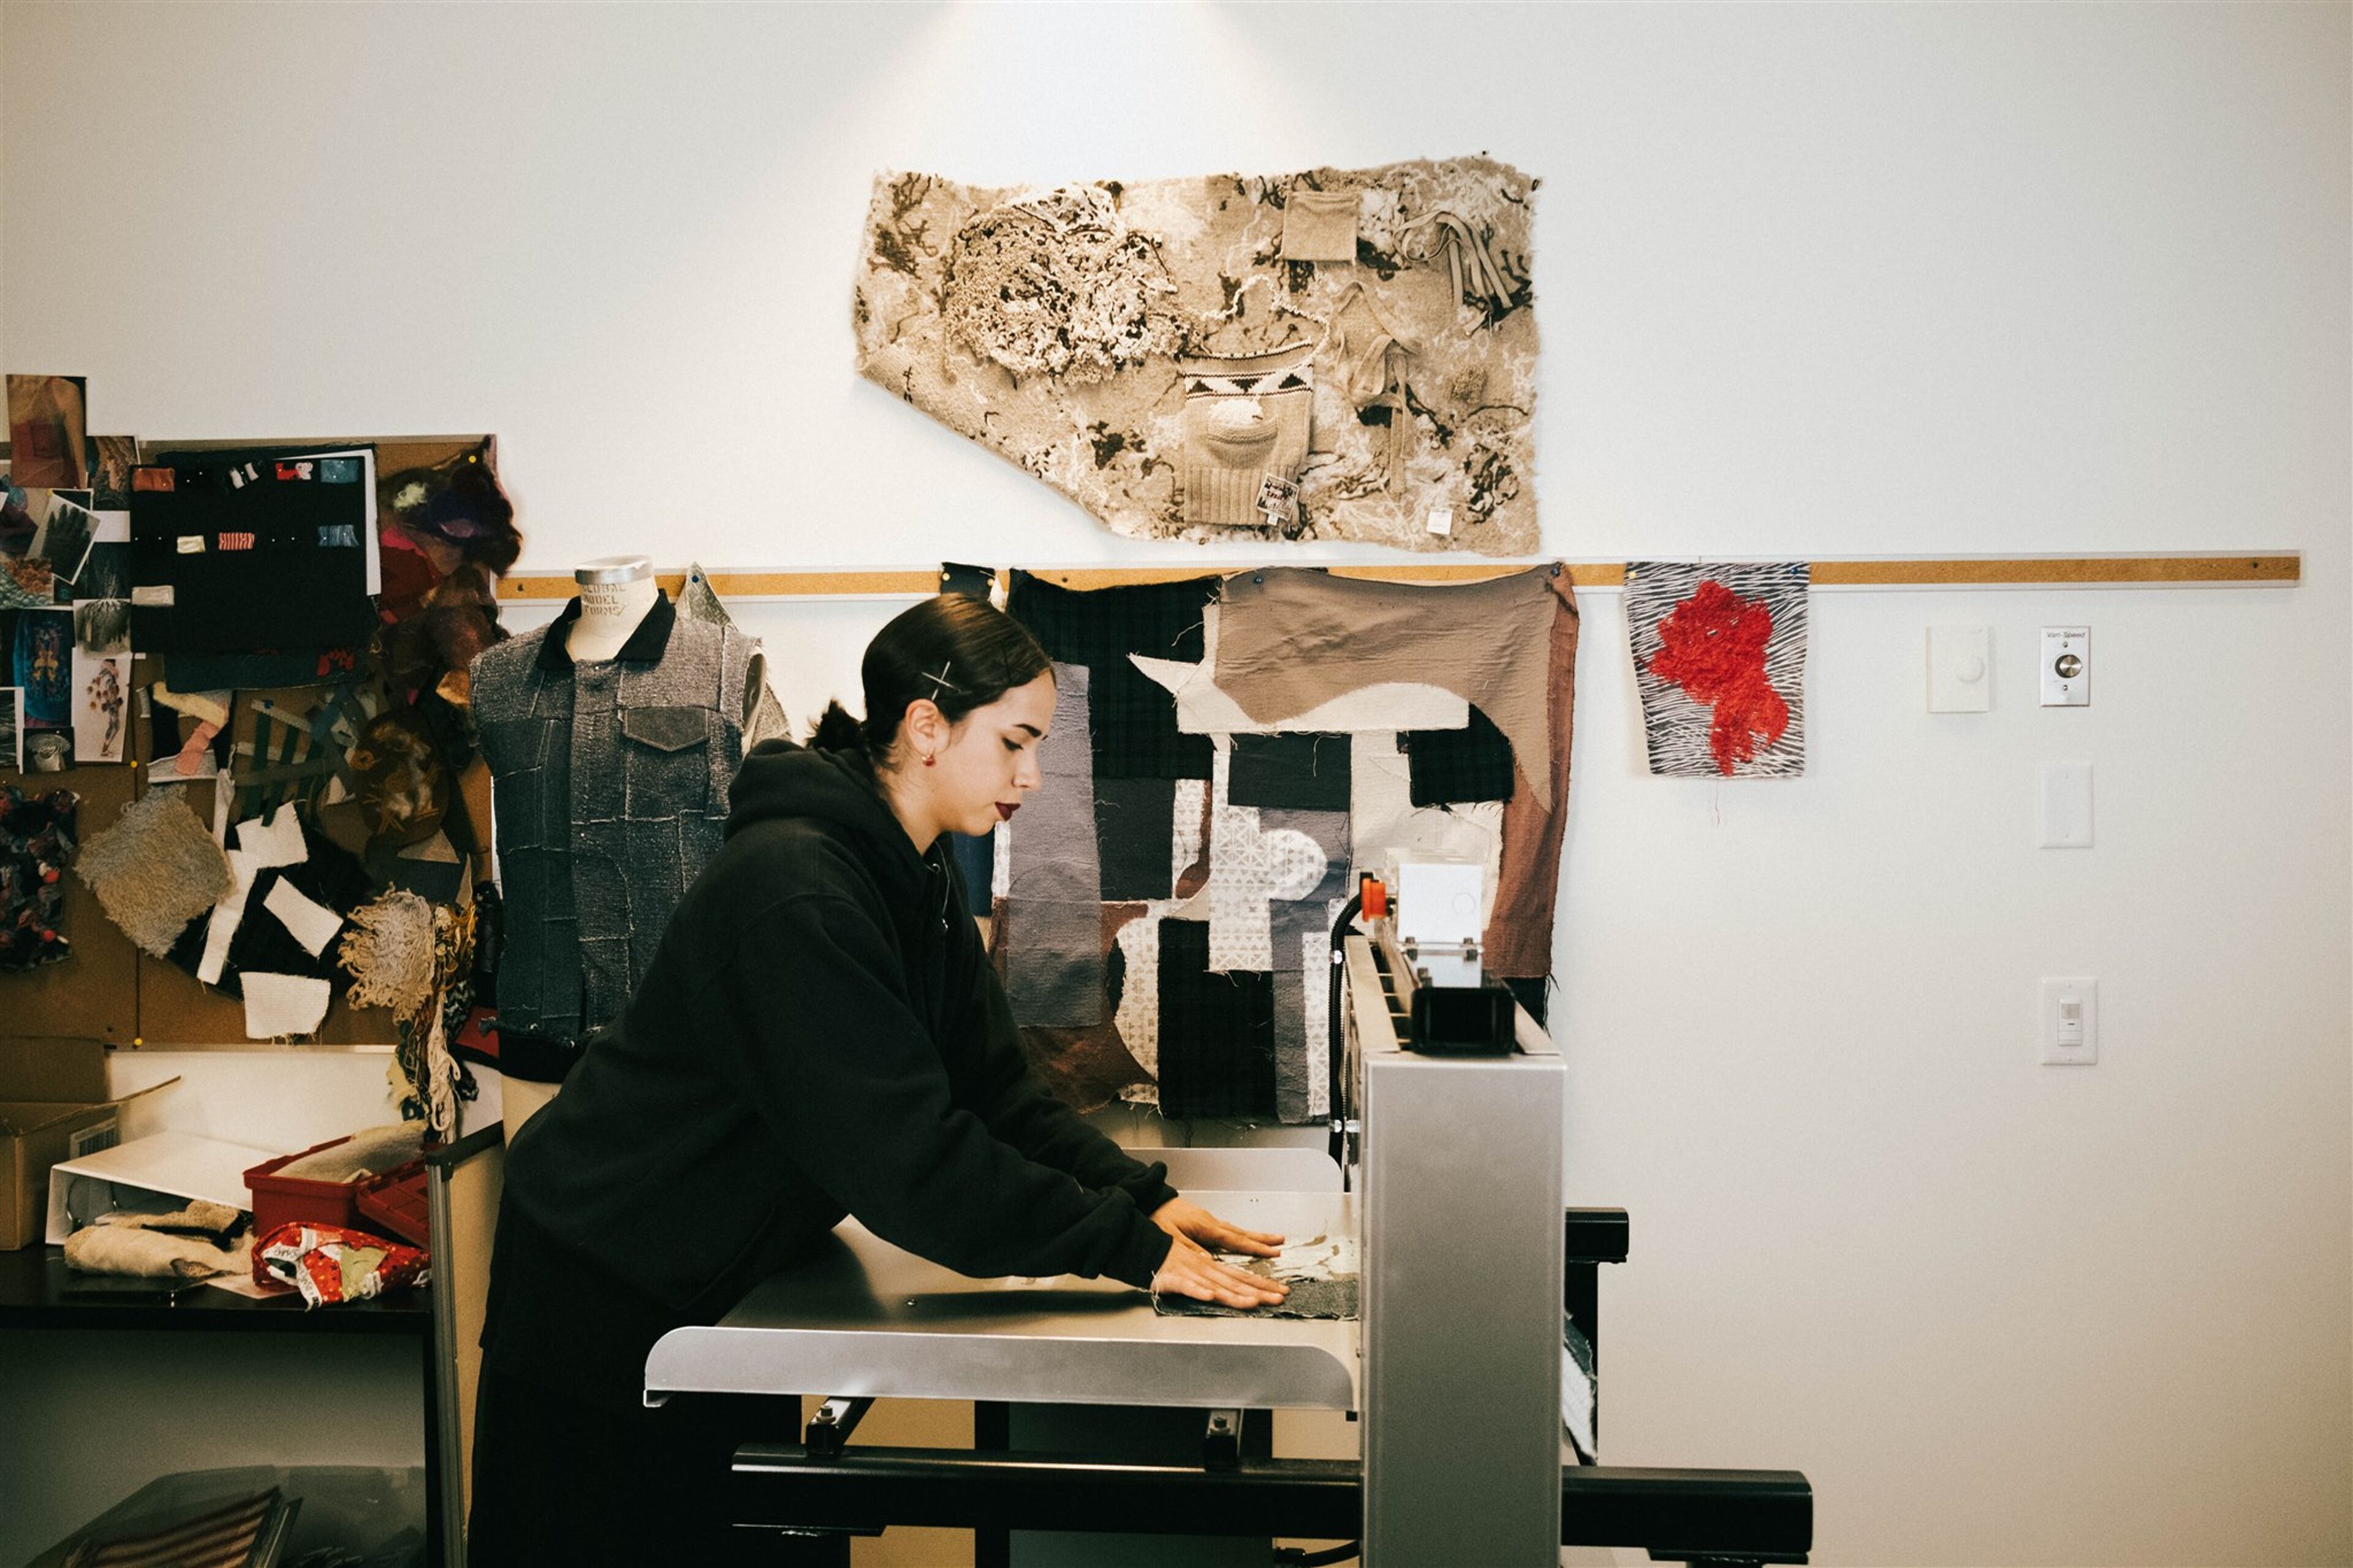 A focused fashion designer operates a sewing machine amidst a creative studio setting, surrounded by fabric samples and a mannequin adorned with a garment.